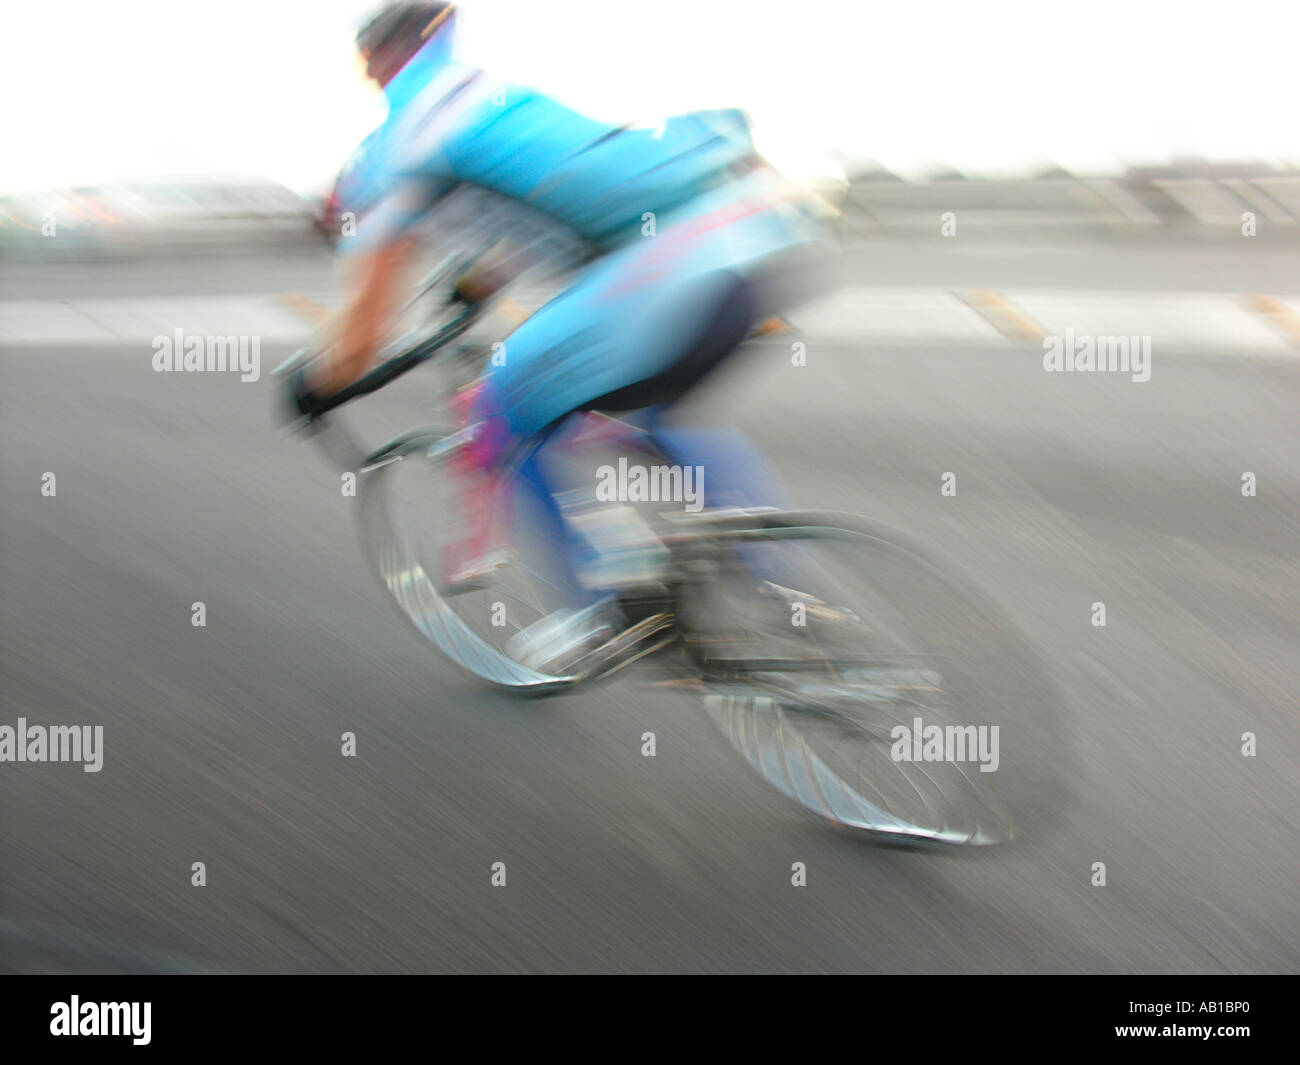 Racing bicycle rider leaning in bend motion blur Stock Photo